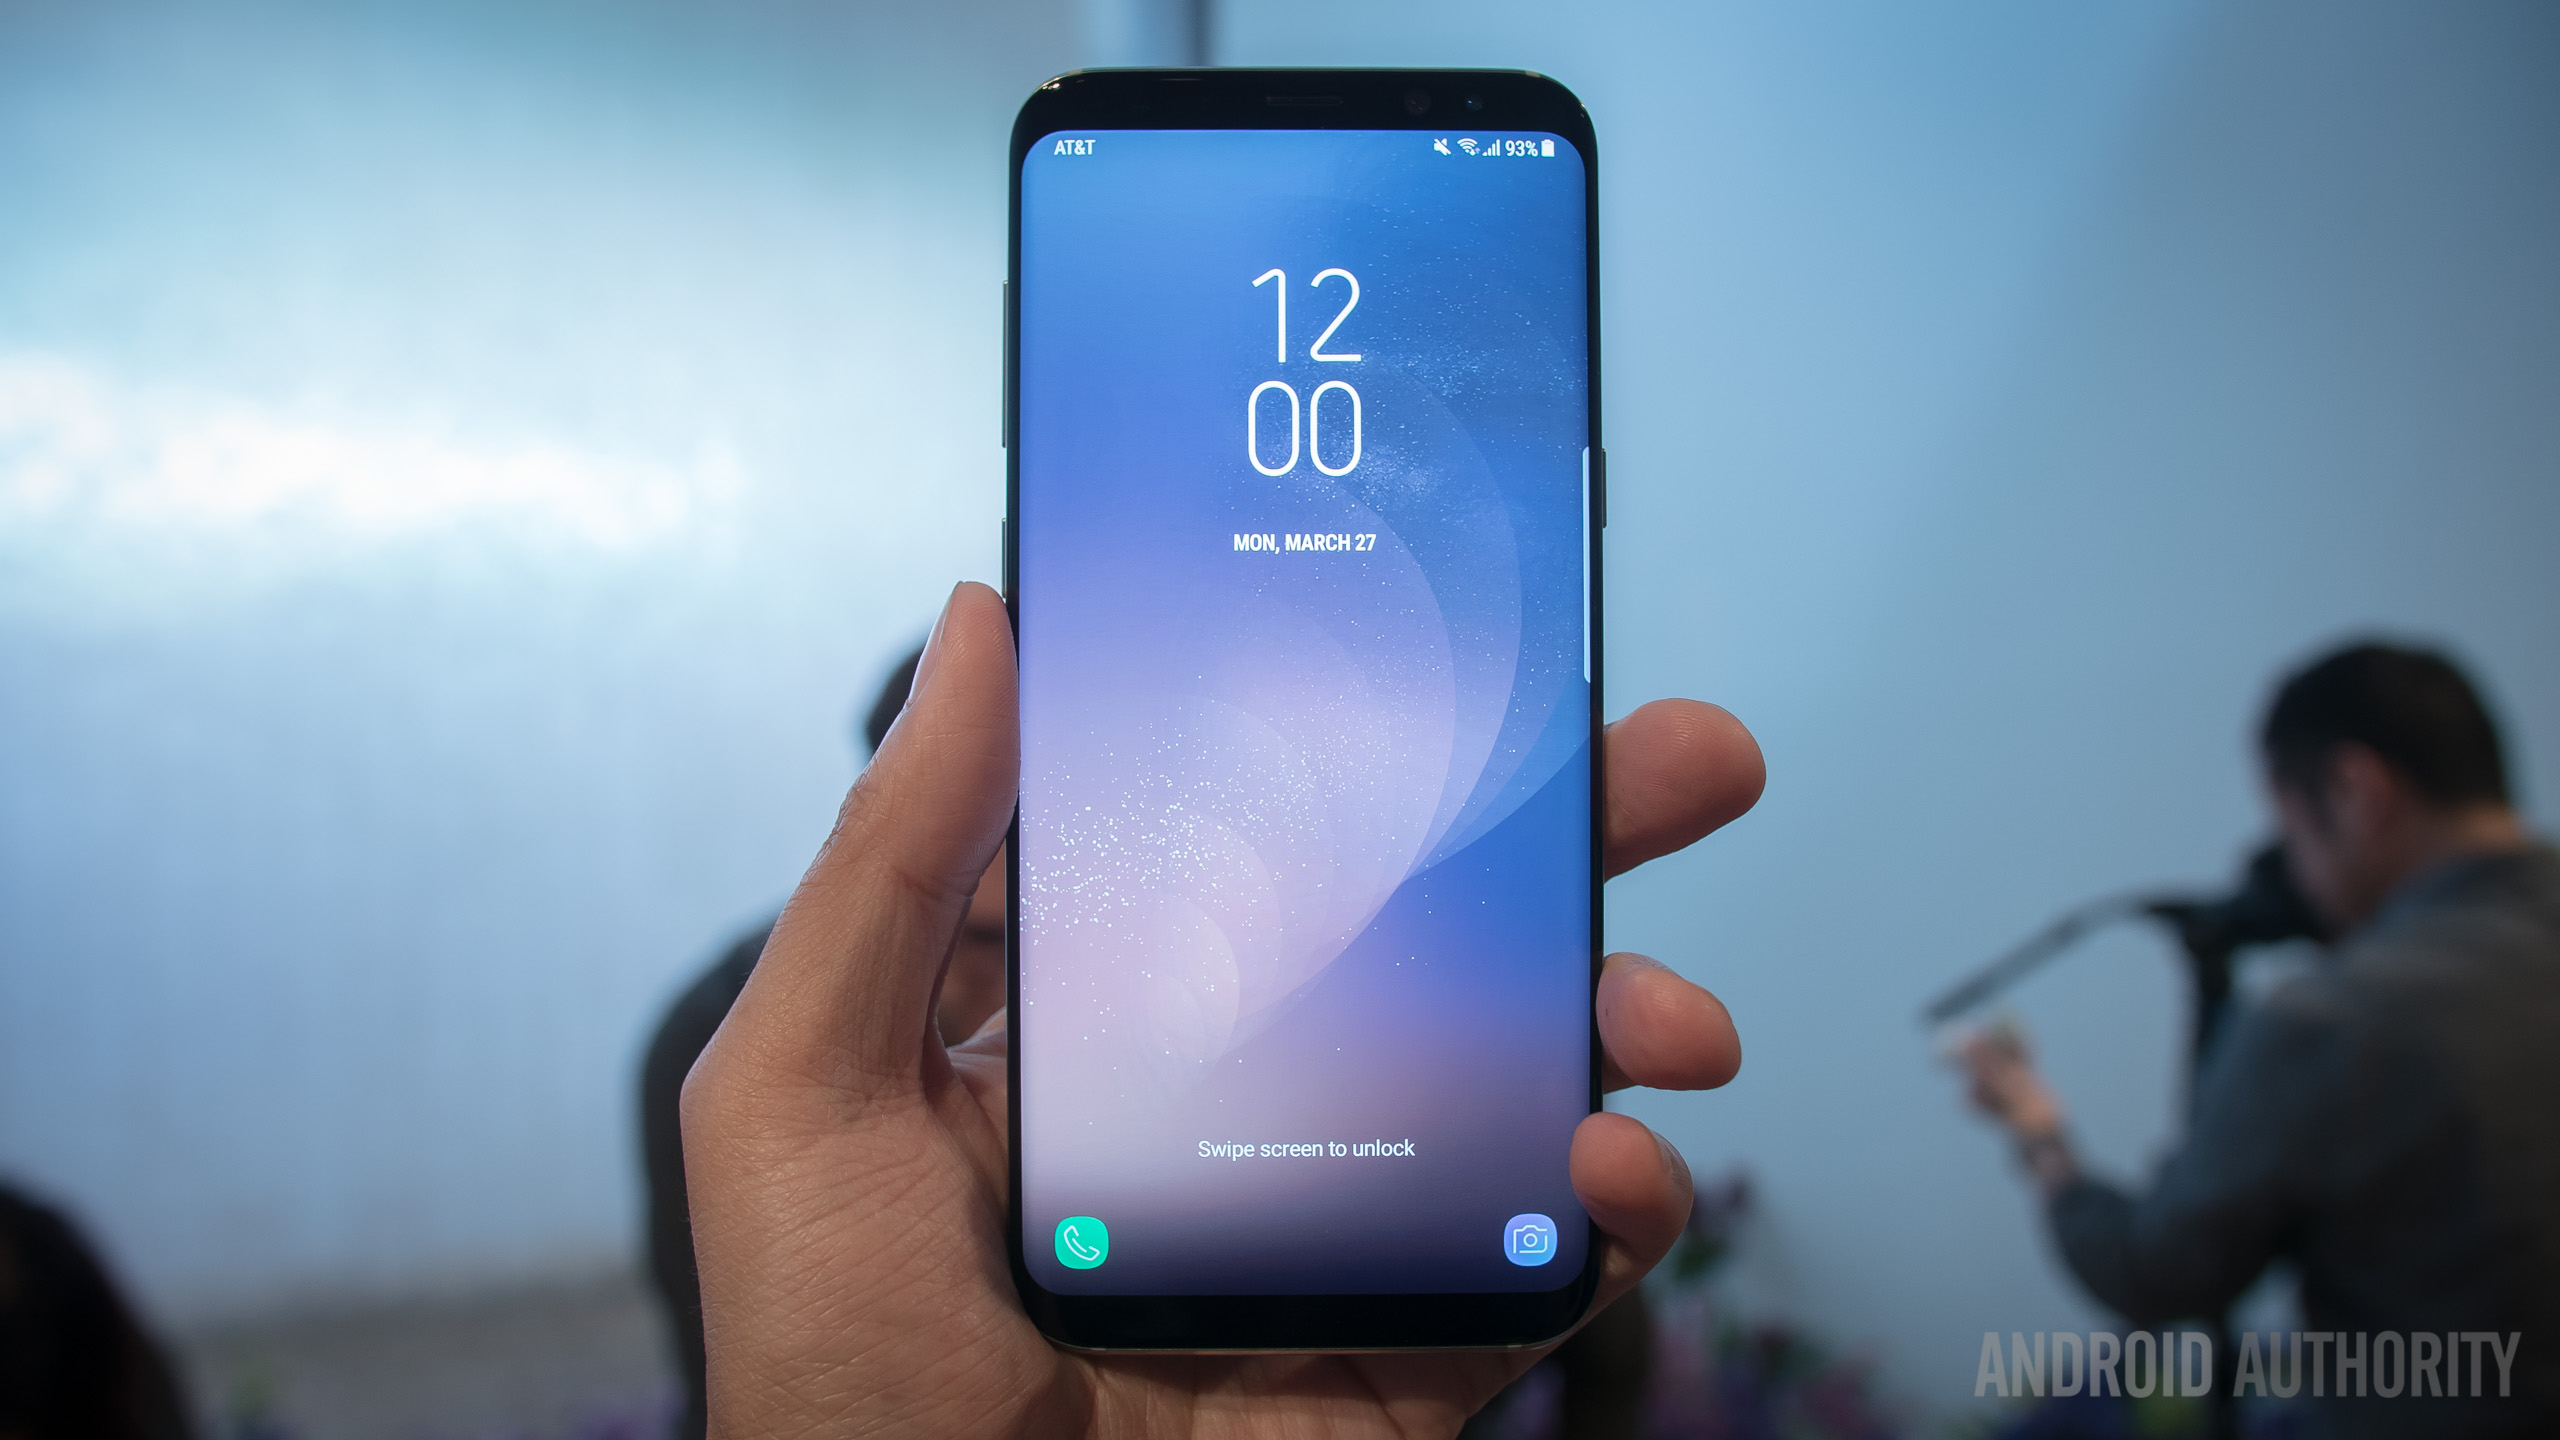 Refurb Special Samsung Galaxy S8 Plus Just With Promo Code